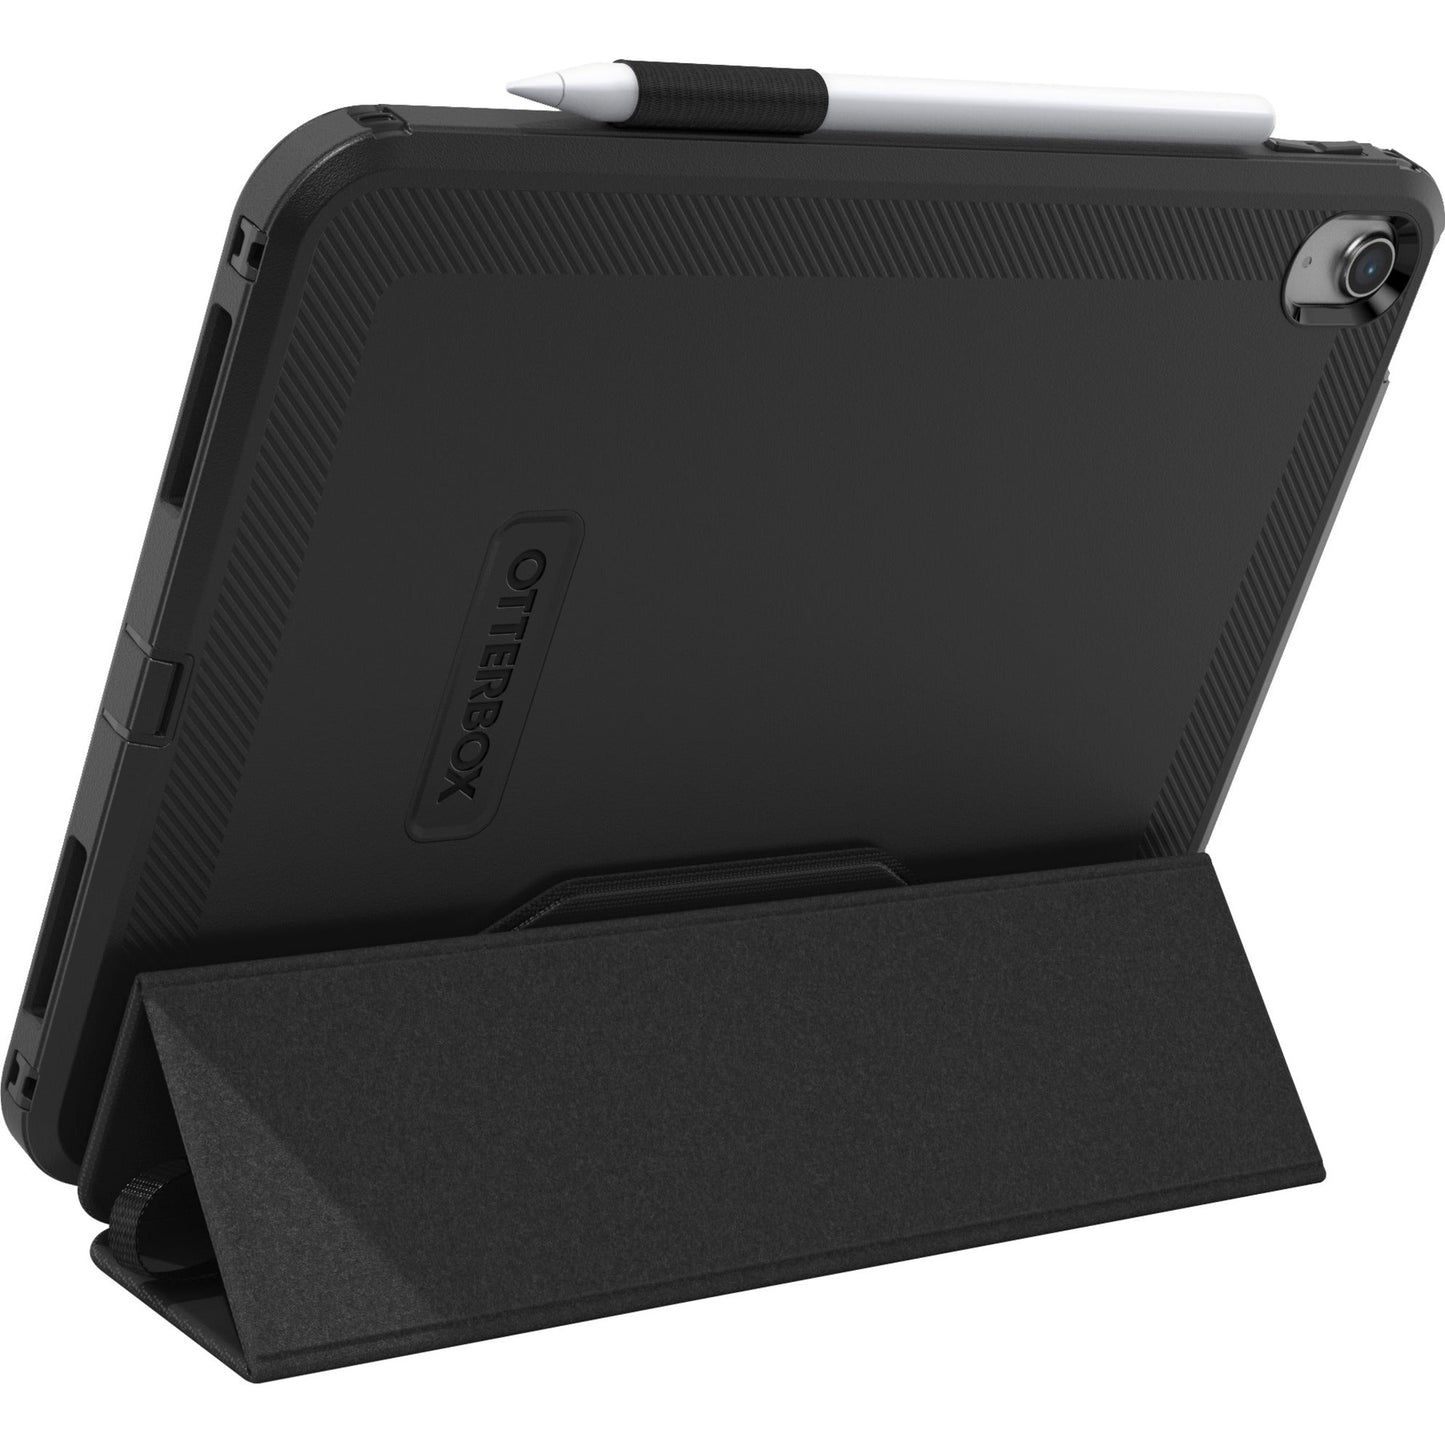 OtterBox Defender Rugged Carrying Case (Folio) for 10.9" Apple iPad (10th Generation) Tablet - Black